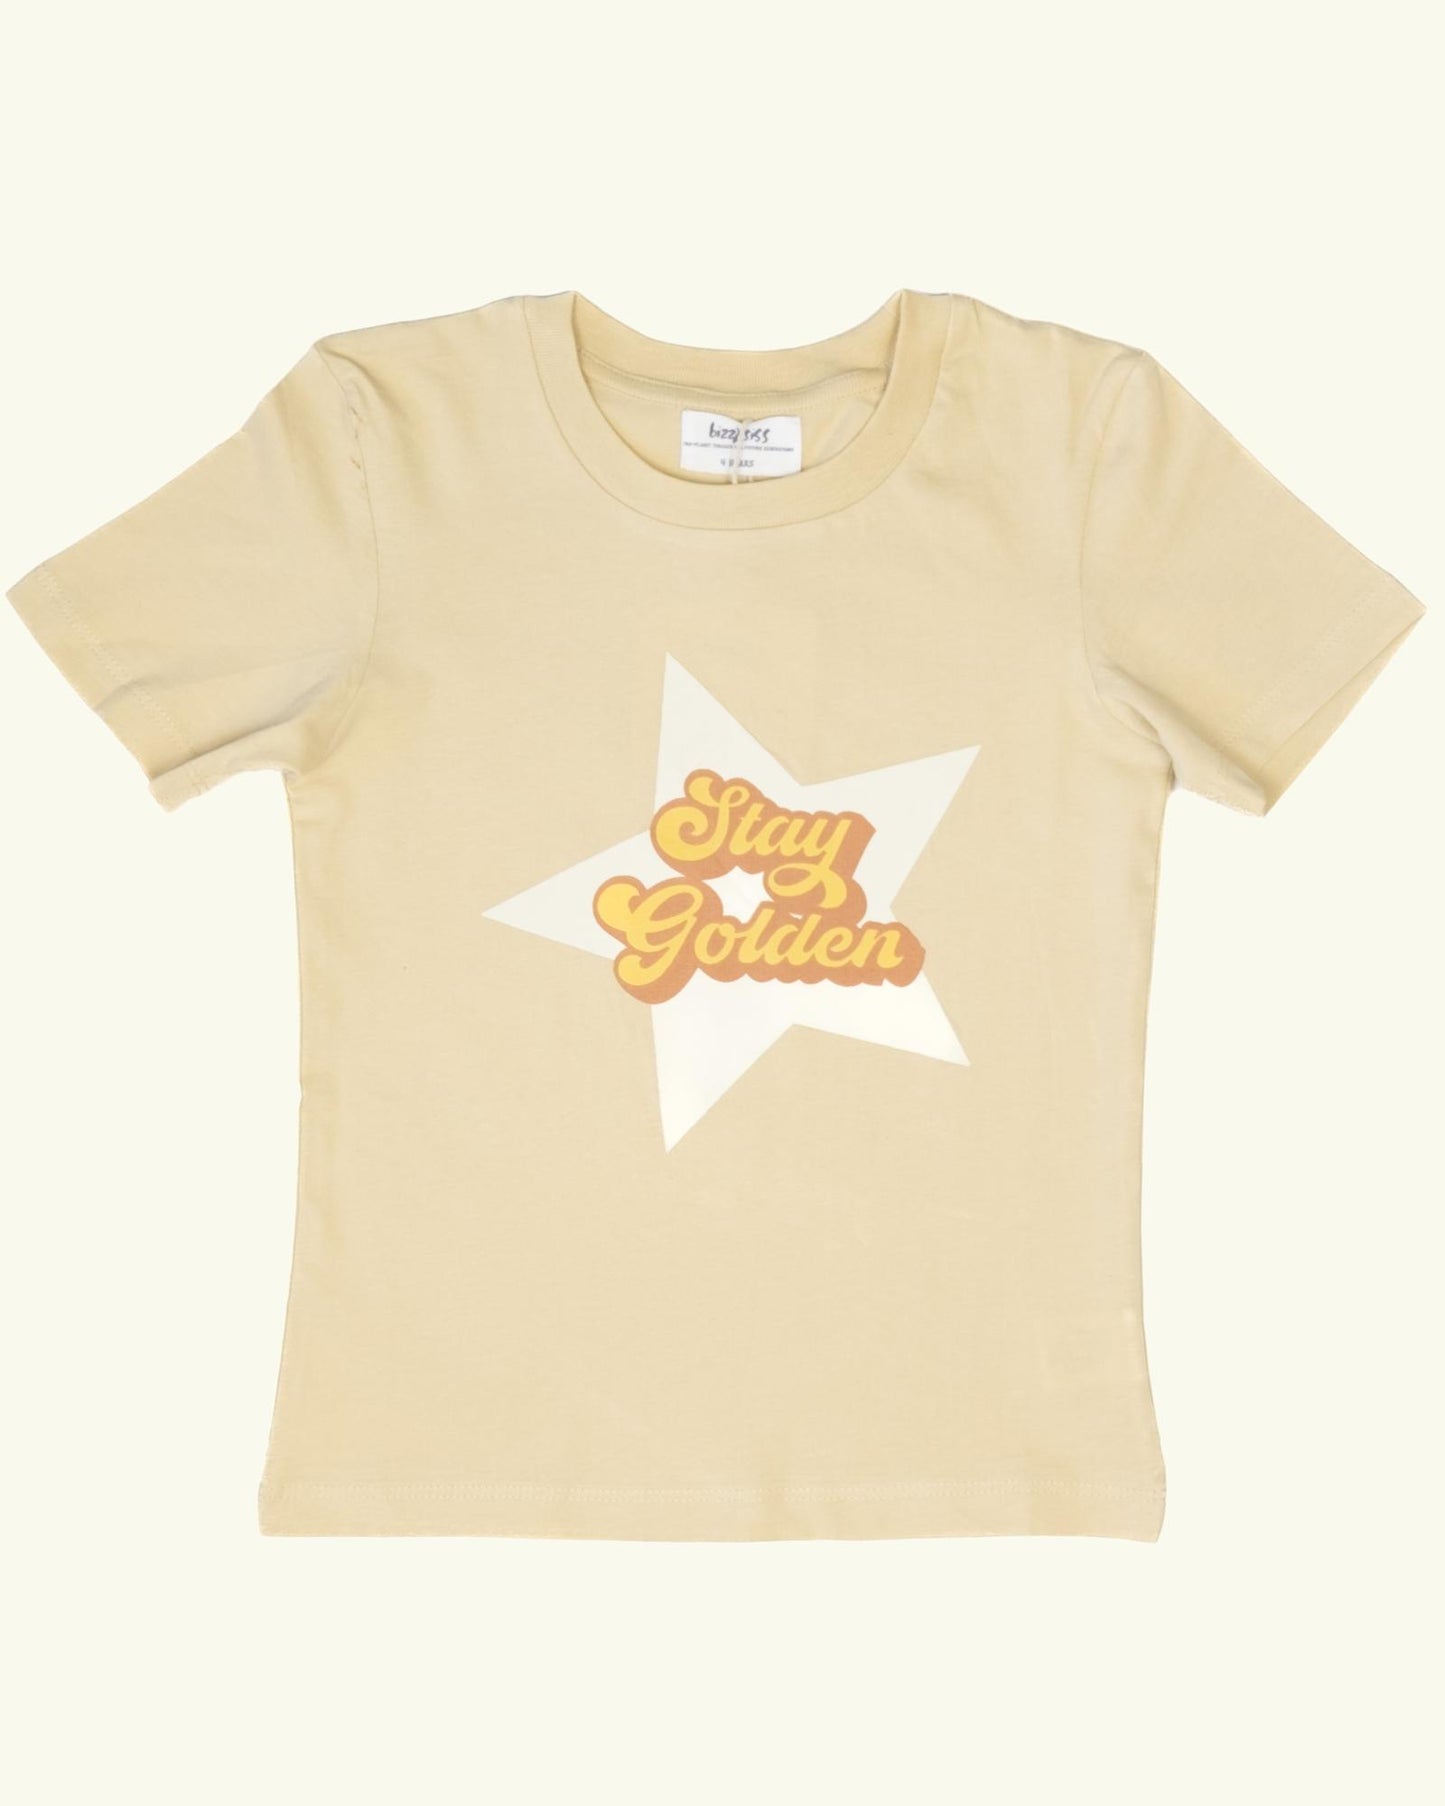 Printed Tee - Stay Golden